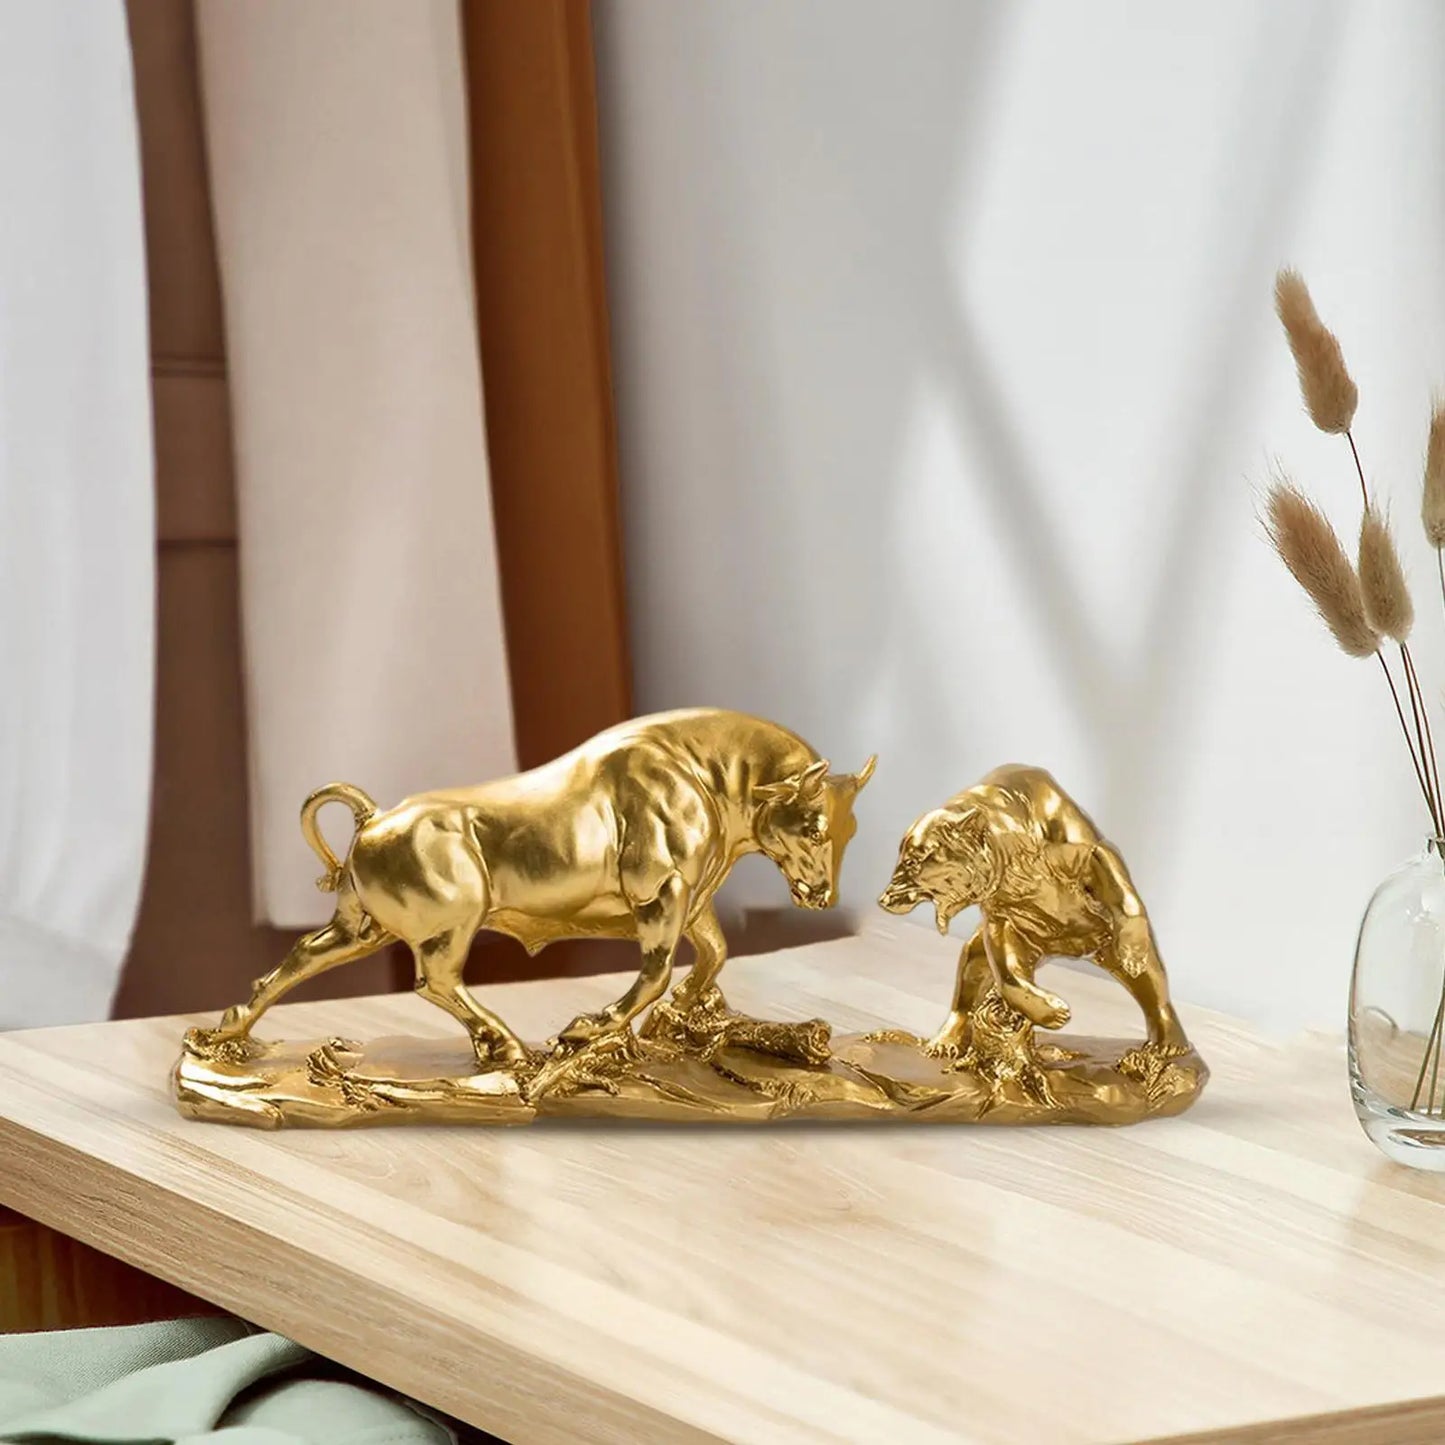 Exquisite Bear and Bull Statue Collection Resin Figurine Ornament Animal Sculpture for Desktop Shelf Bookcase Shelves Decoration